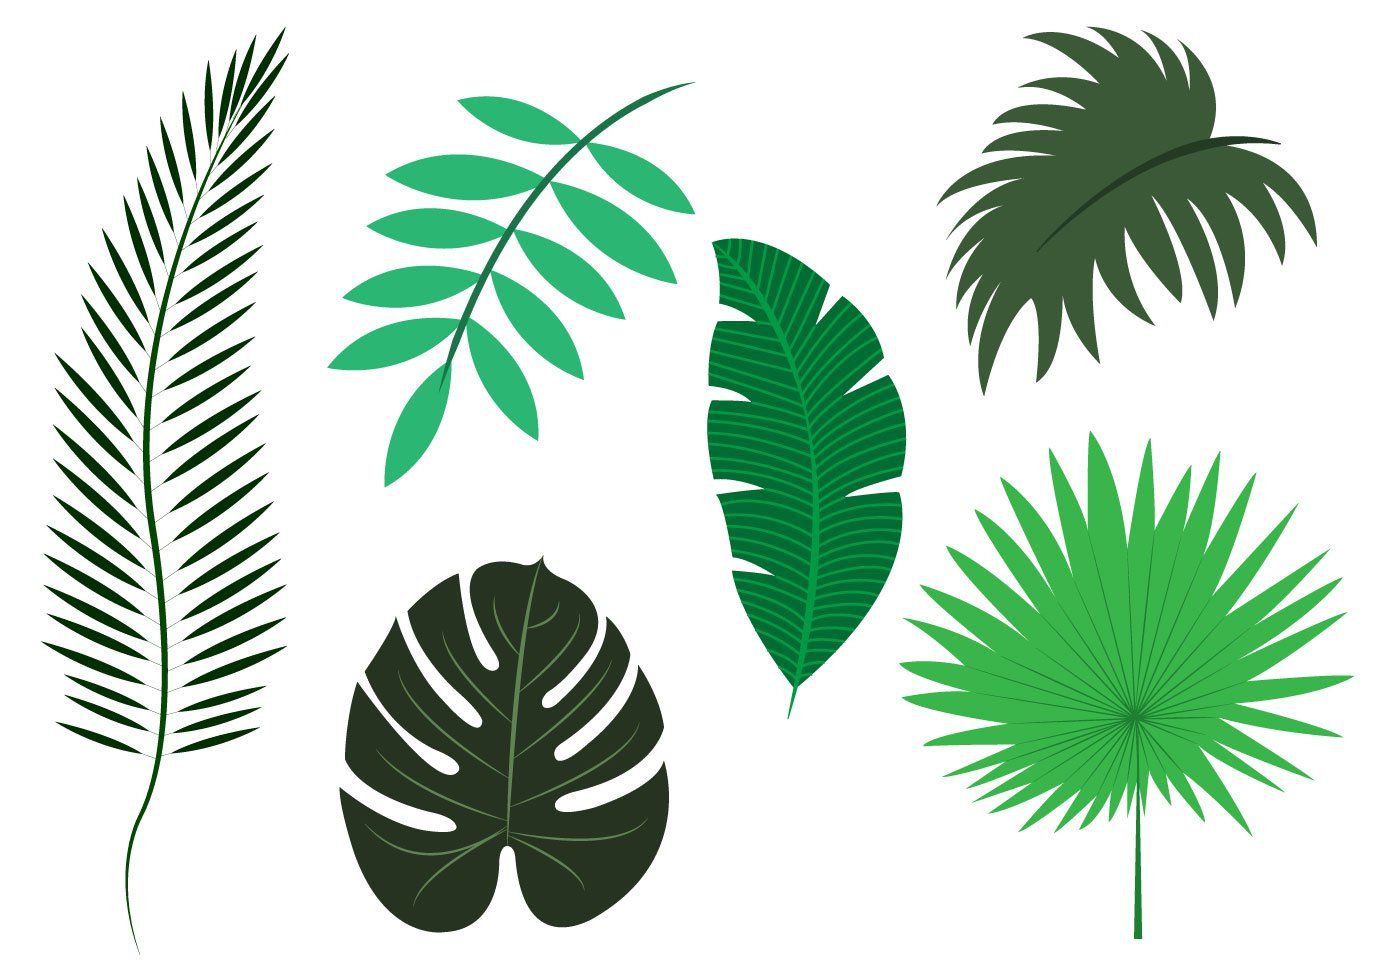 clipart leaves tree paper